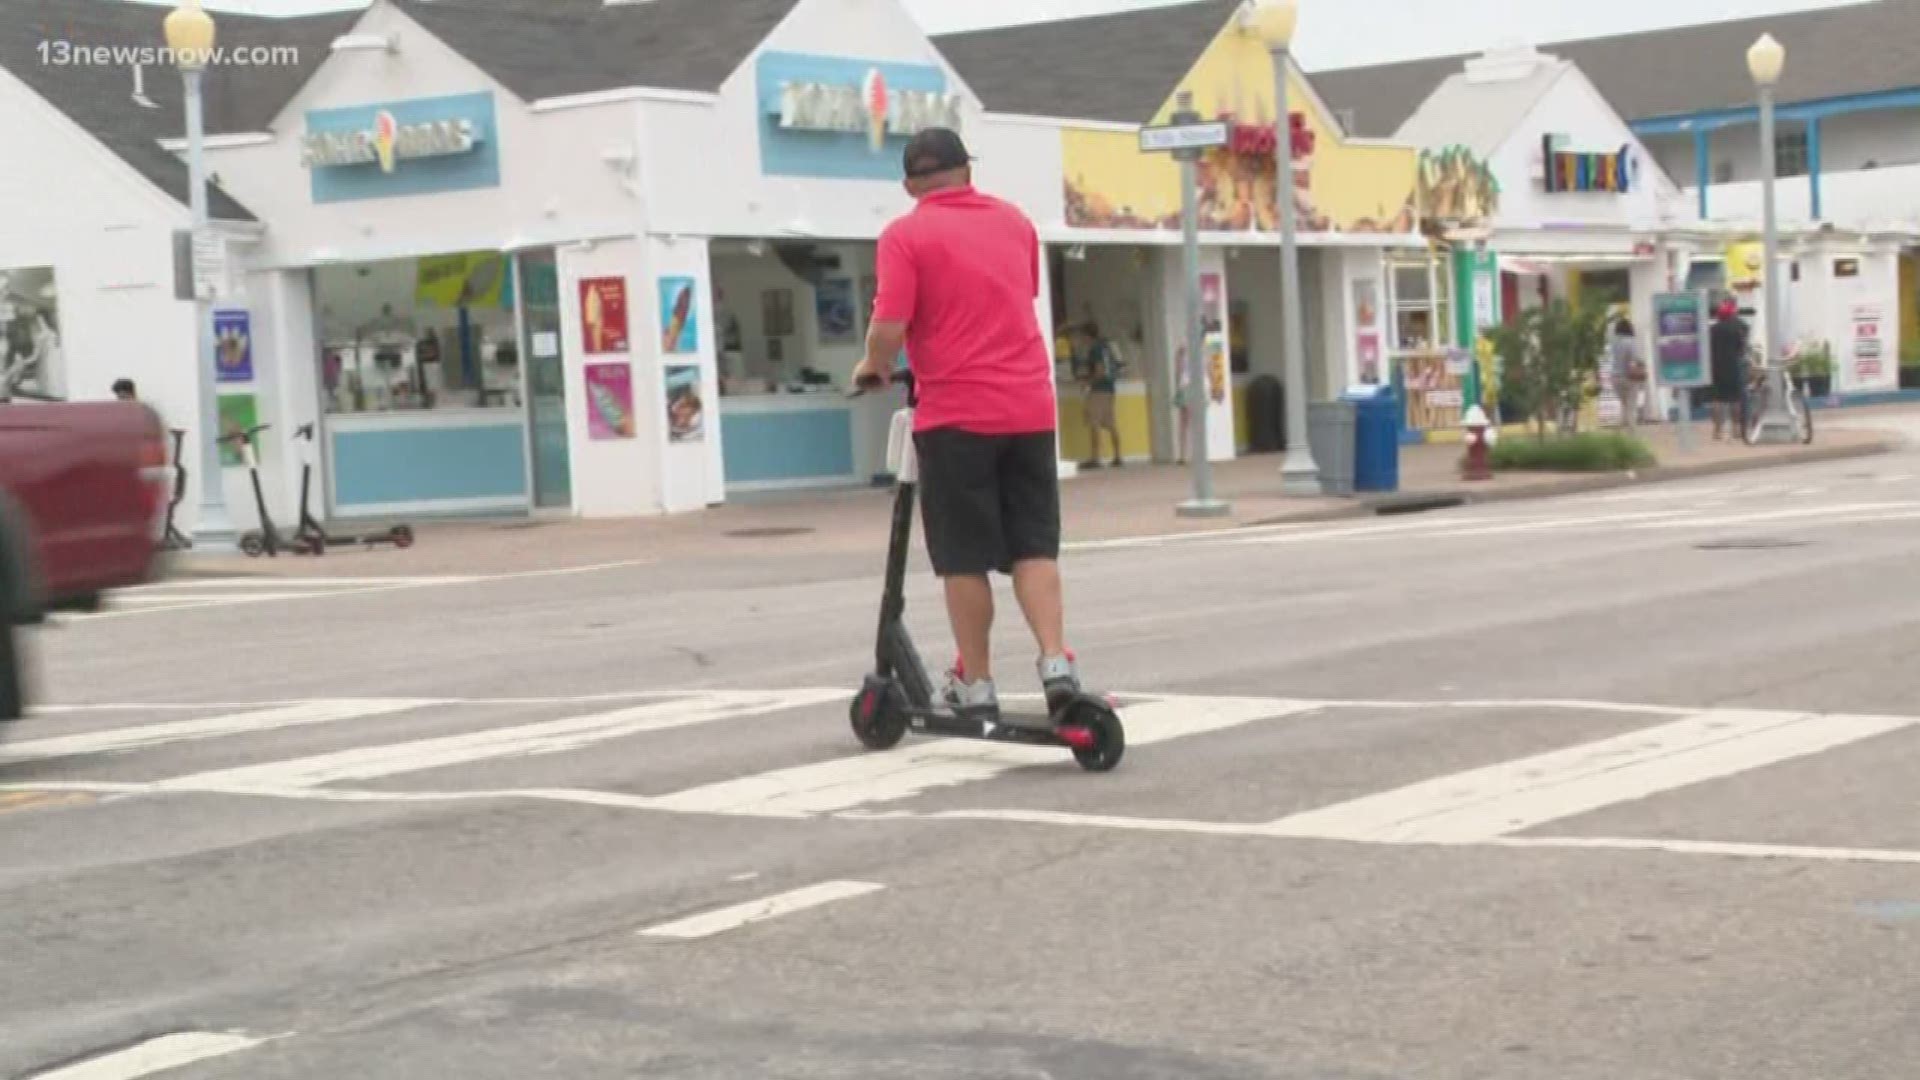 Virginia Beach City Council could ban the scooters from the resort area, at least temporarily, over safety concerns.